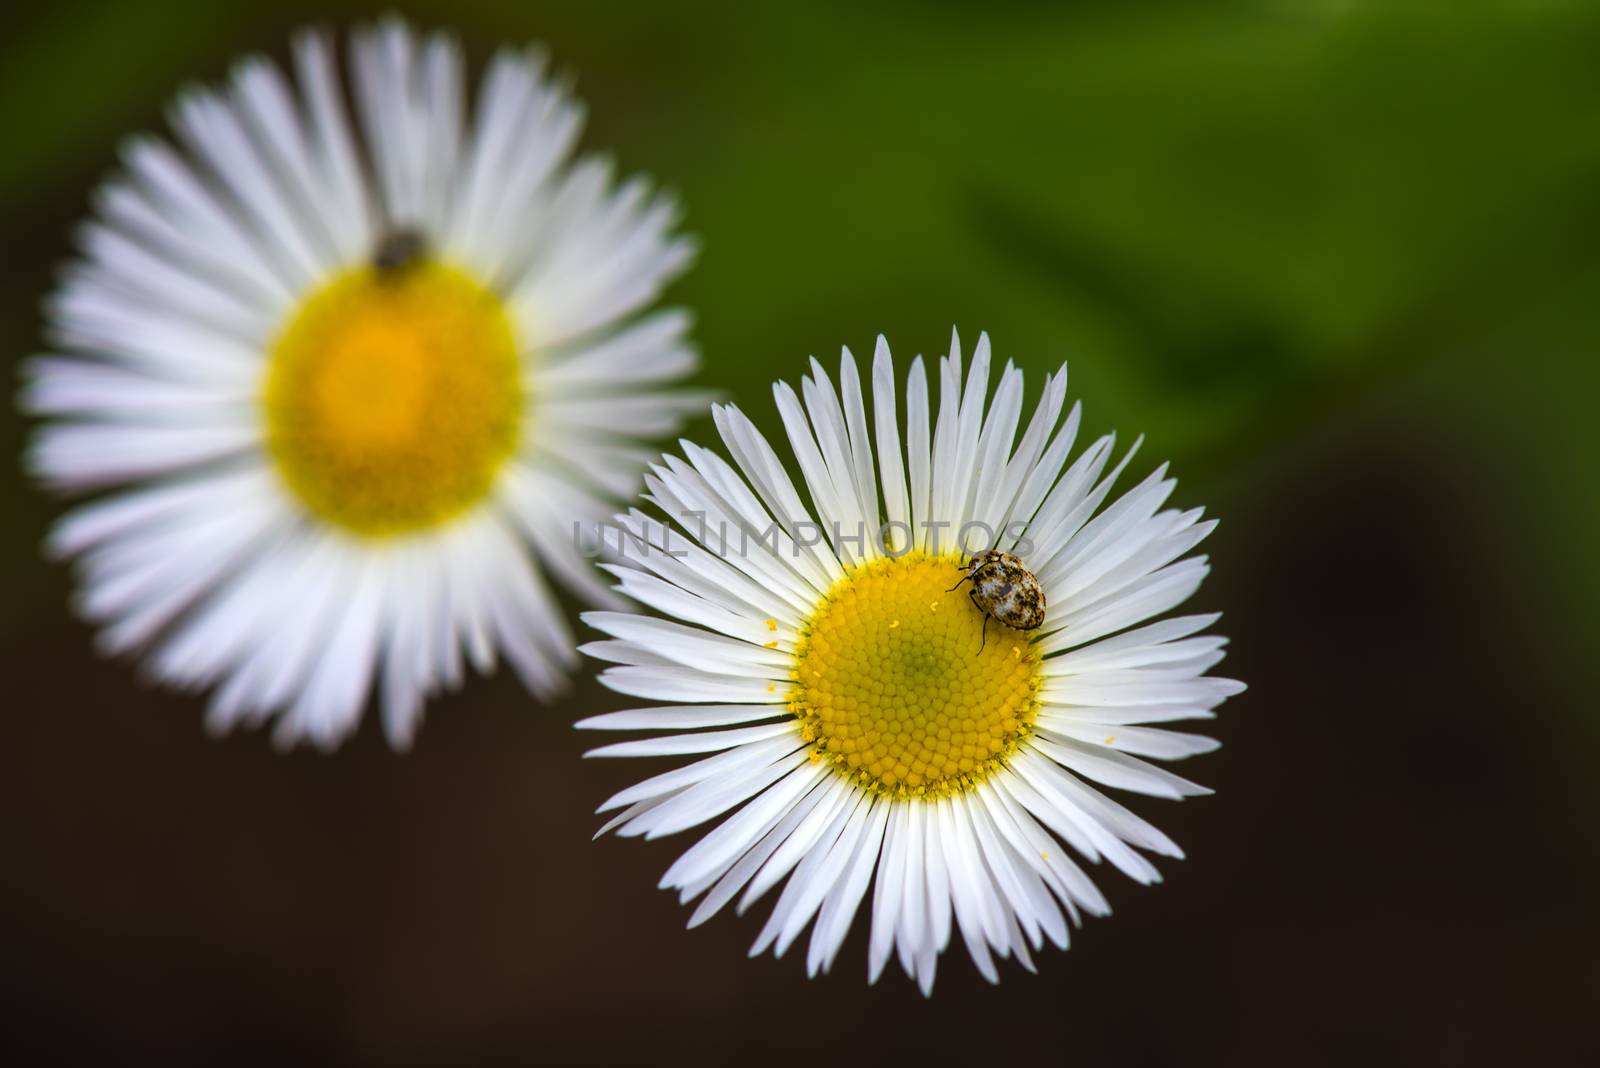 a beetle sitting on a white daisy flower